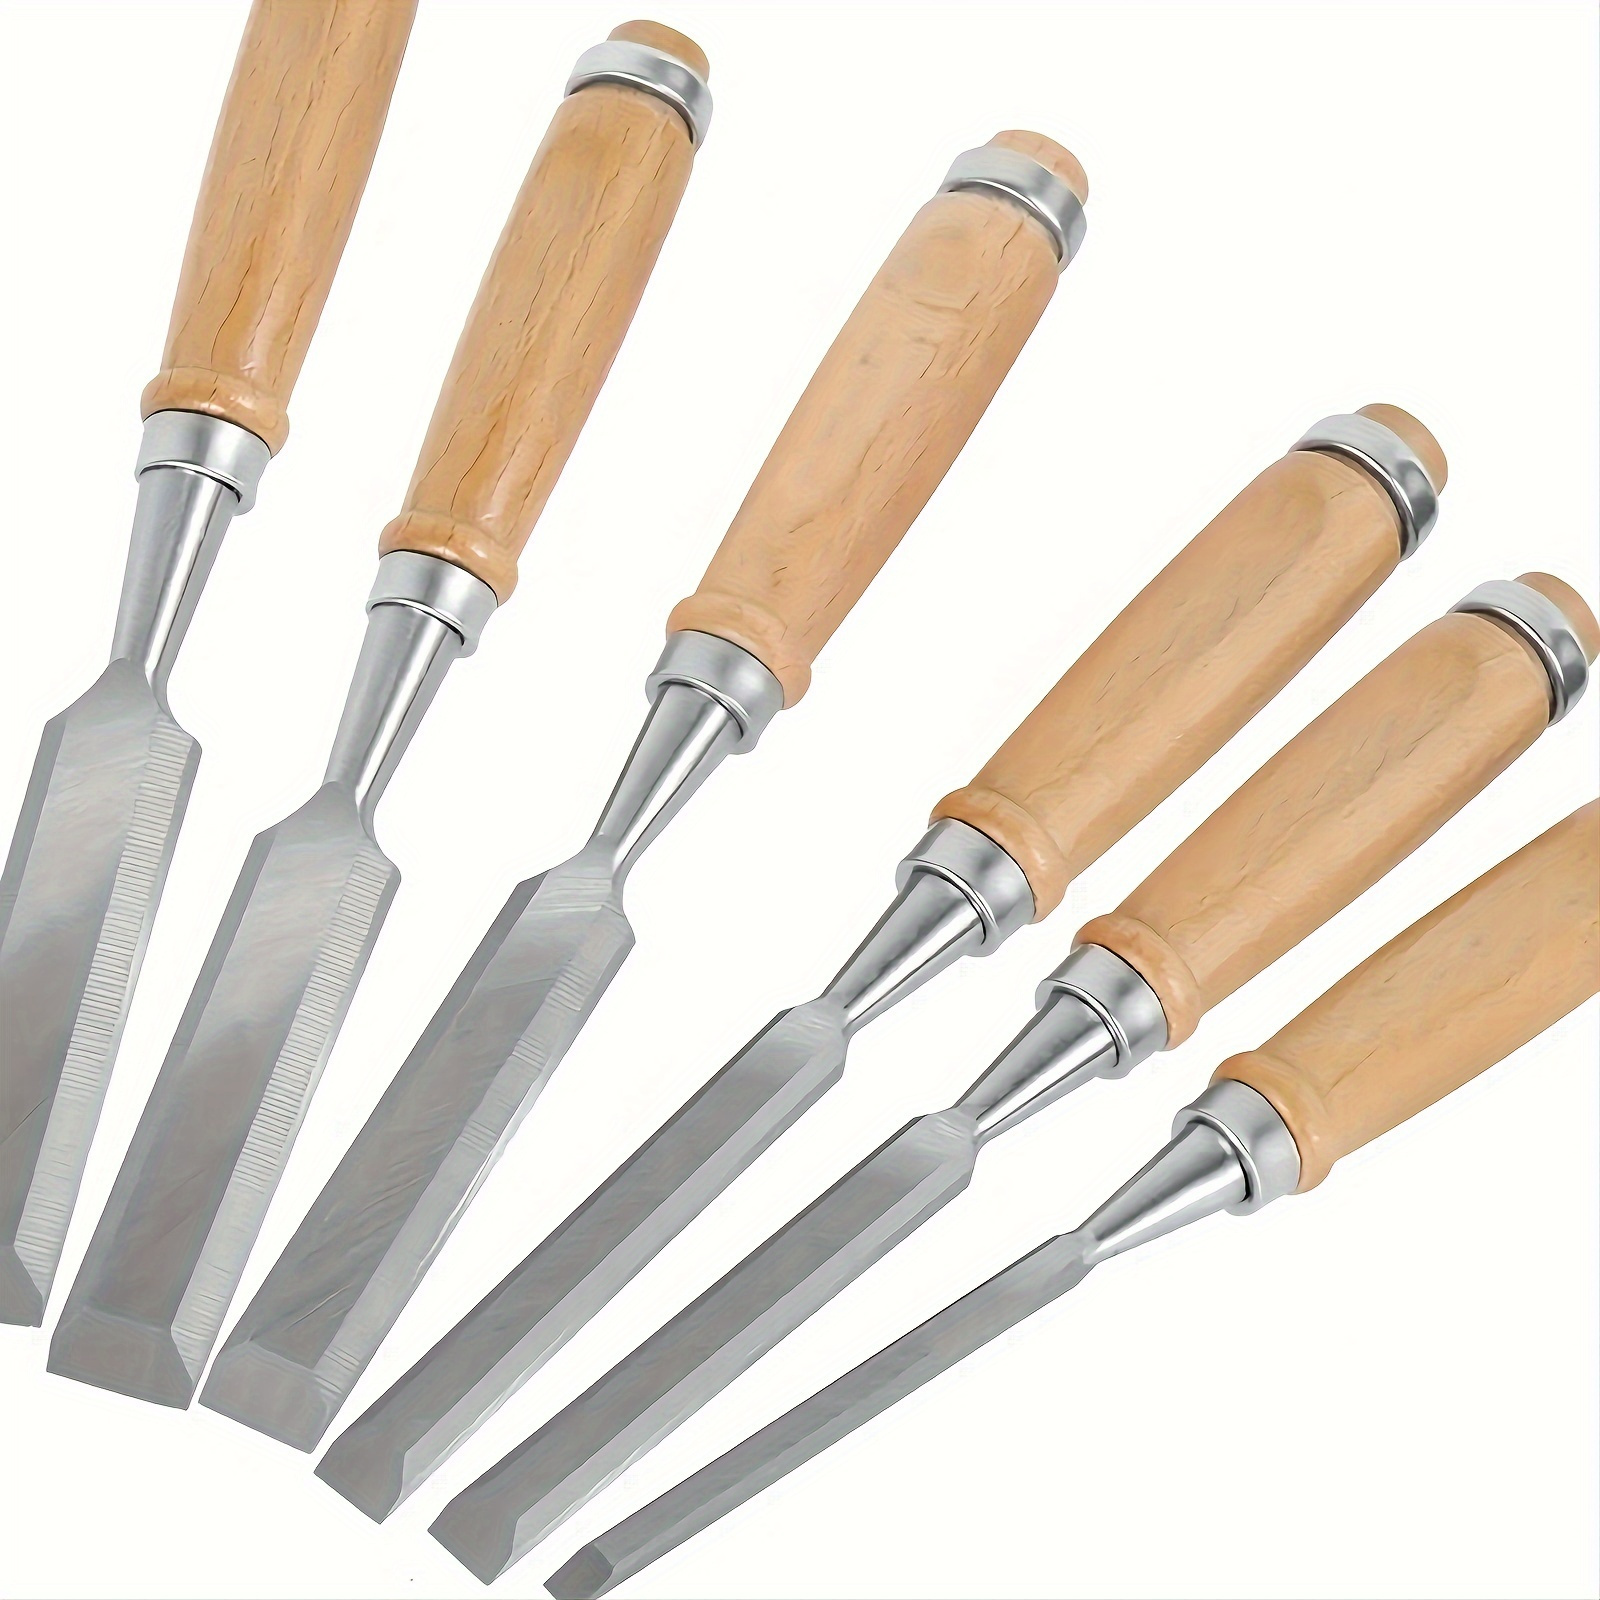 5pcs 6mm-24mm Wooden Chisel Carving Knife Woodworking Chisel Set DIY Wood  Sculpture Crafts Tools Woodworkers